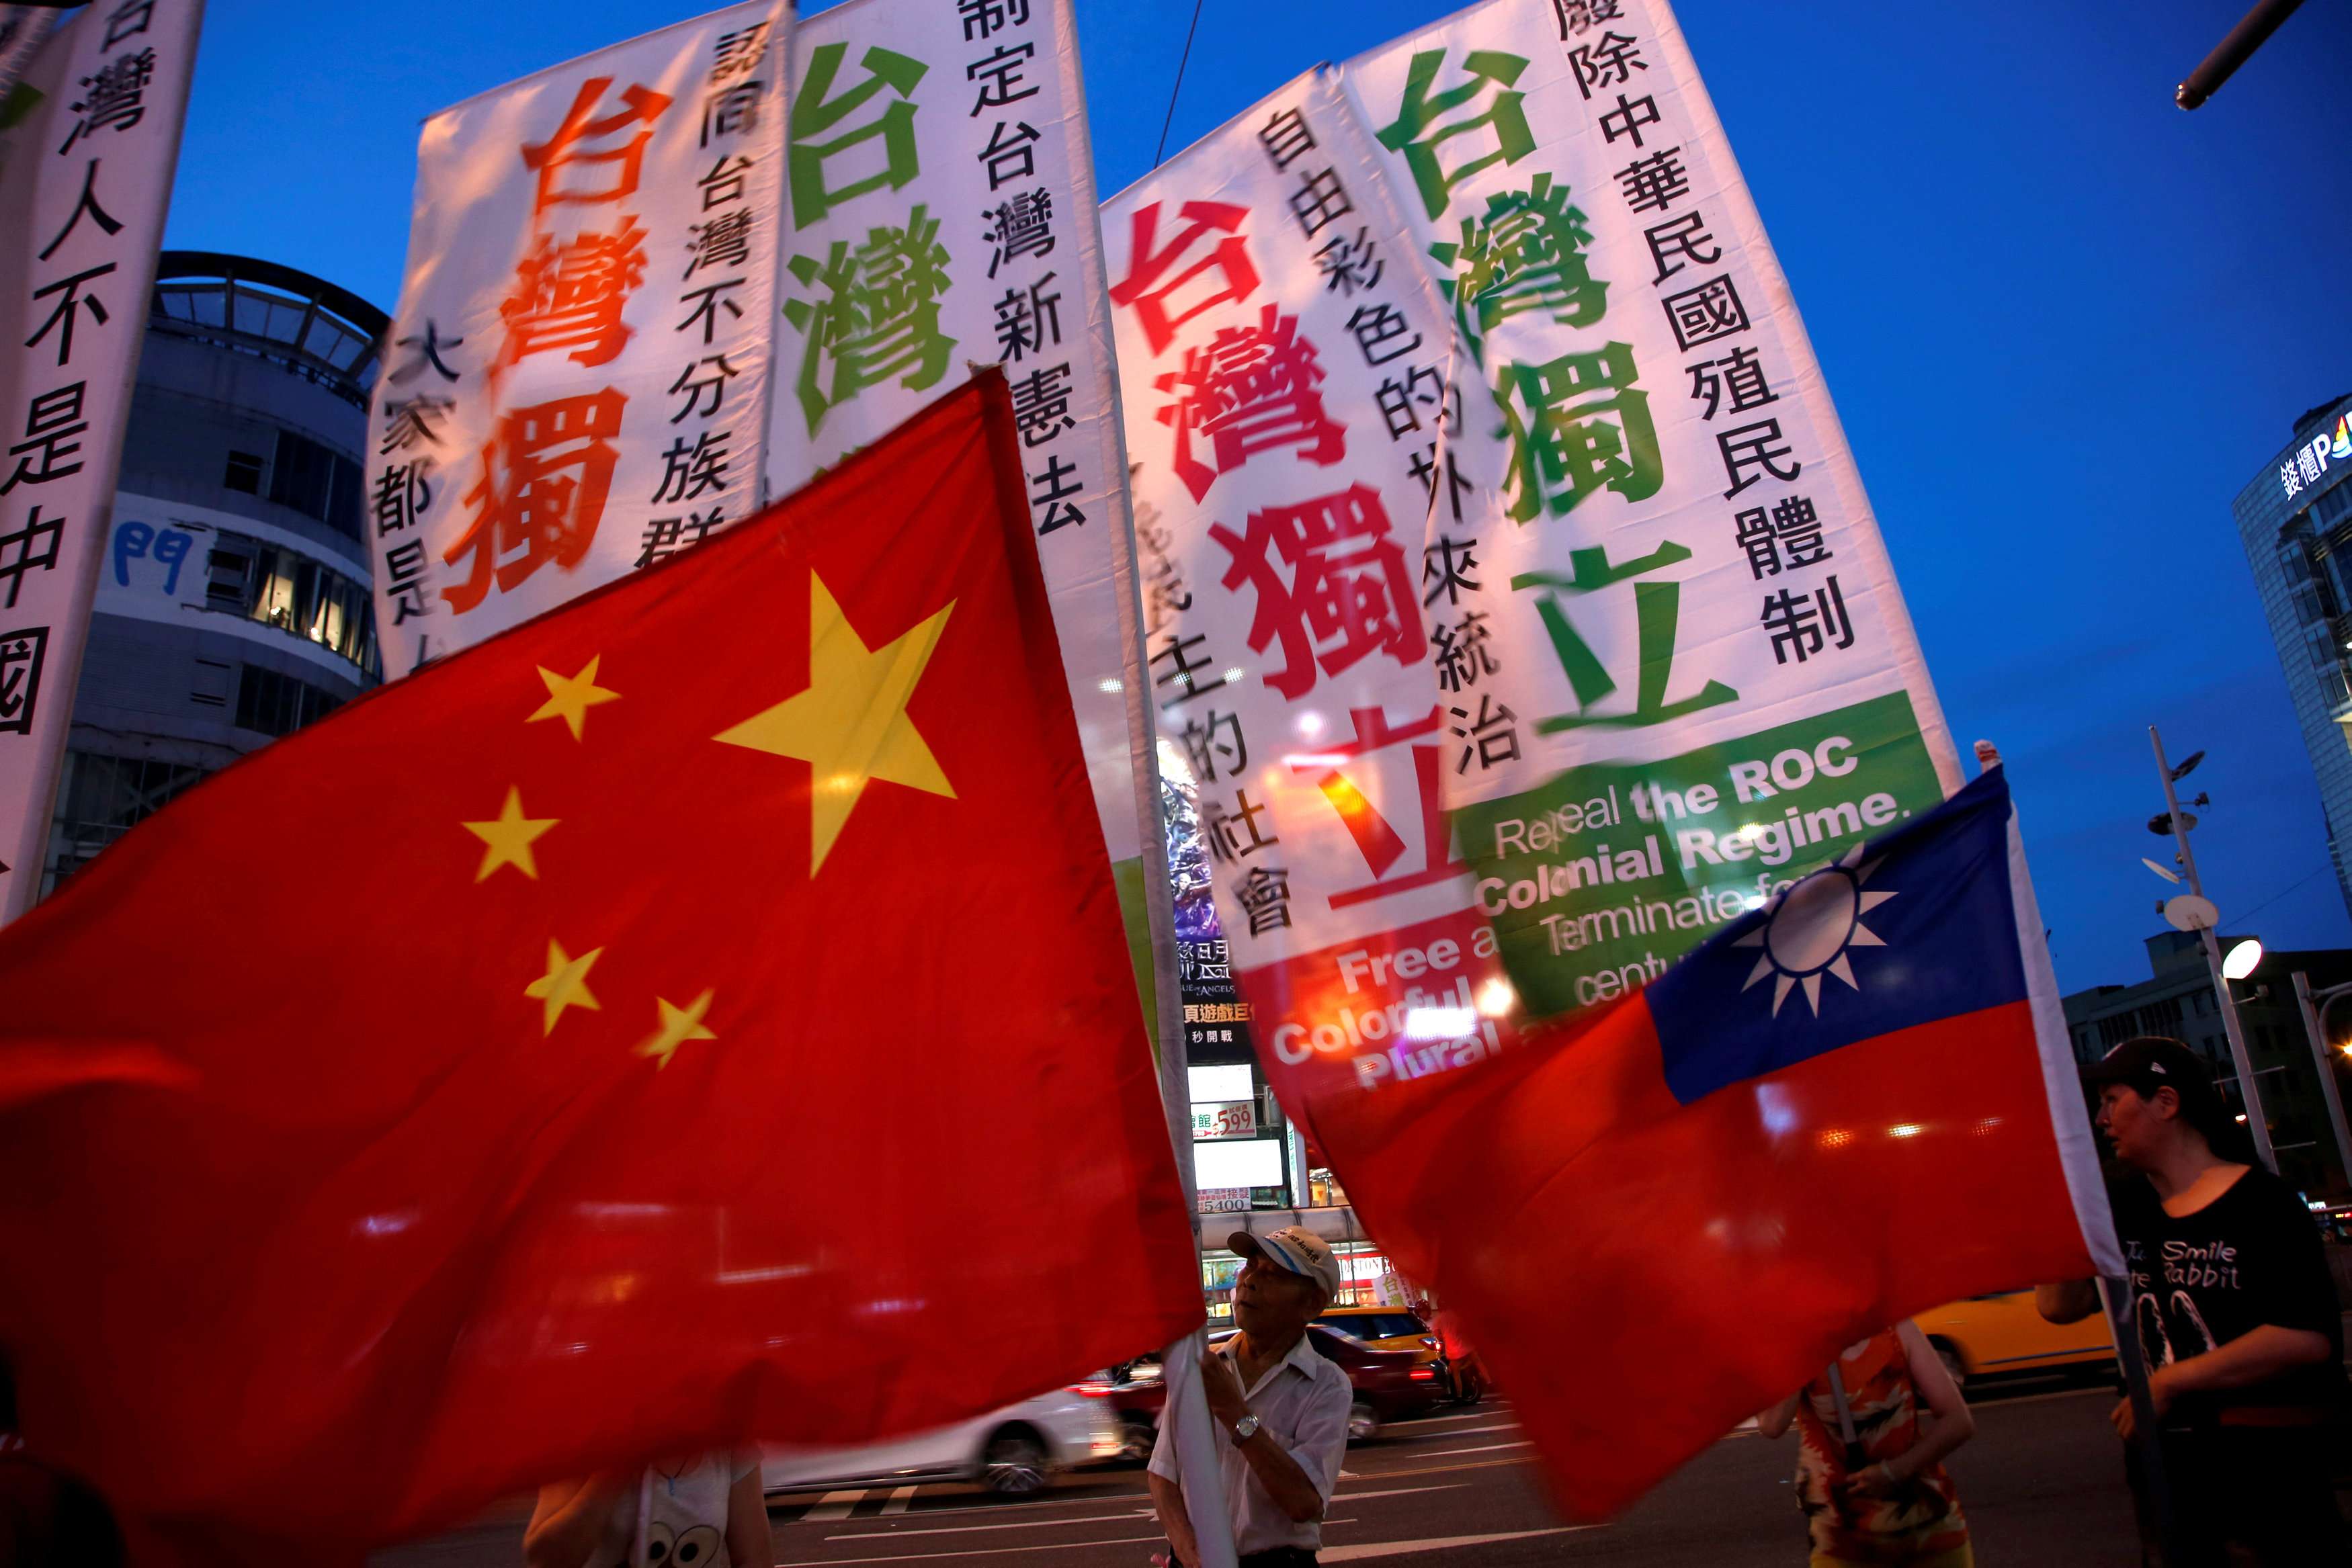 Members of a pro-independence group march with flags of Taiwan around pro-China demonstrators holding a rally calling for peaceful reunification, in Taipei on May 14. Photo: Reuters